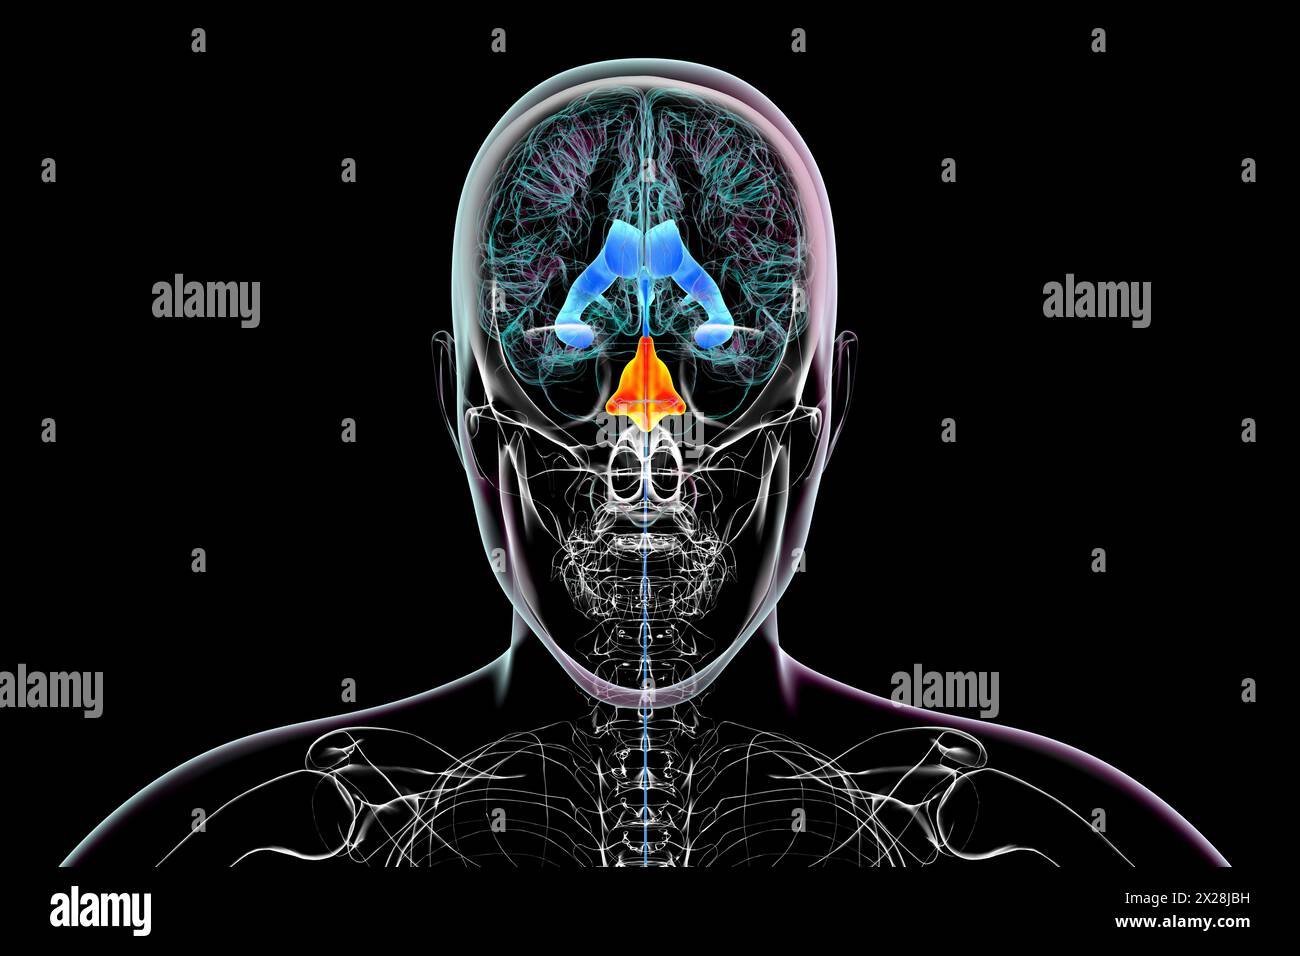 Enlargement of the fourth brain ventricle, illustration Stock Photo